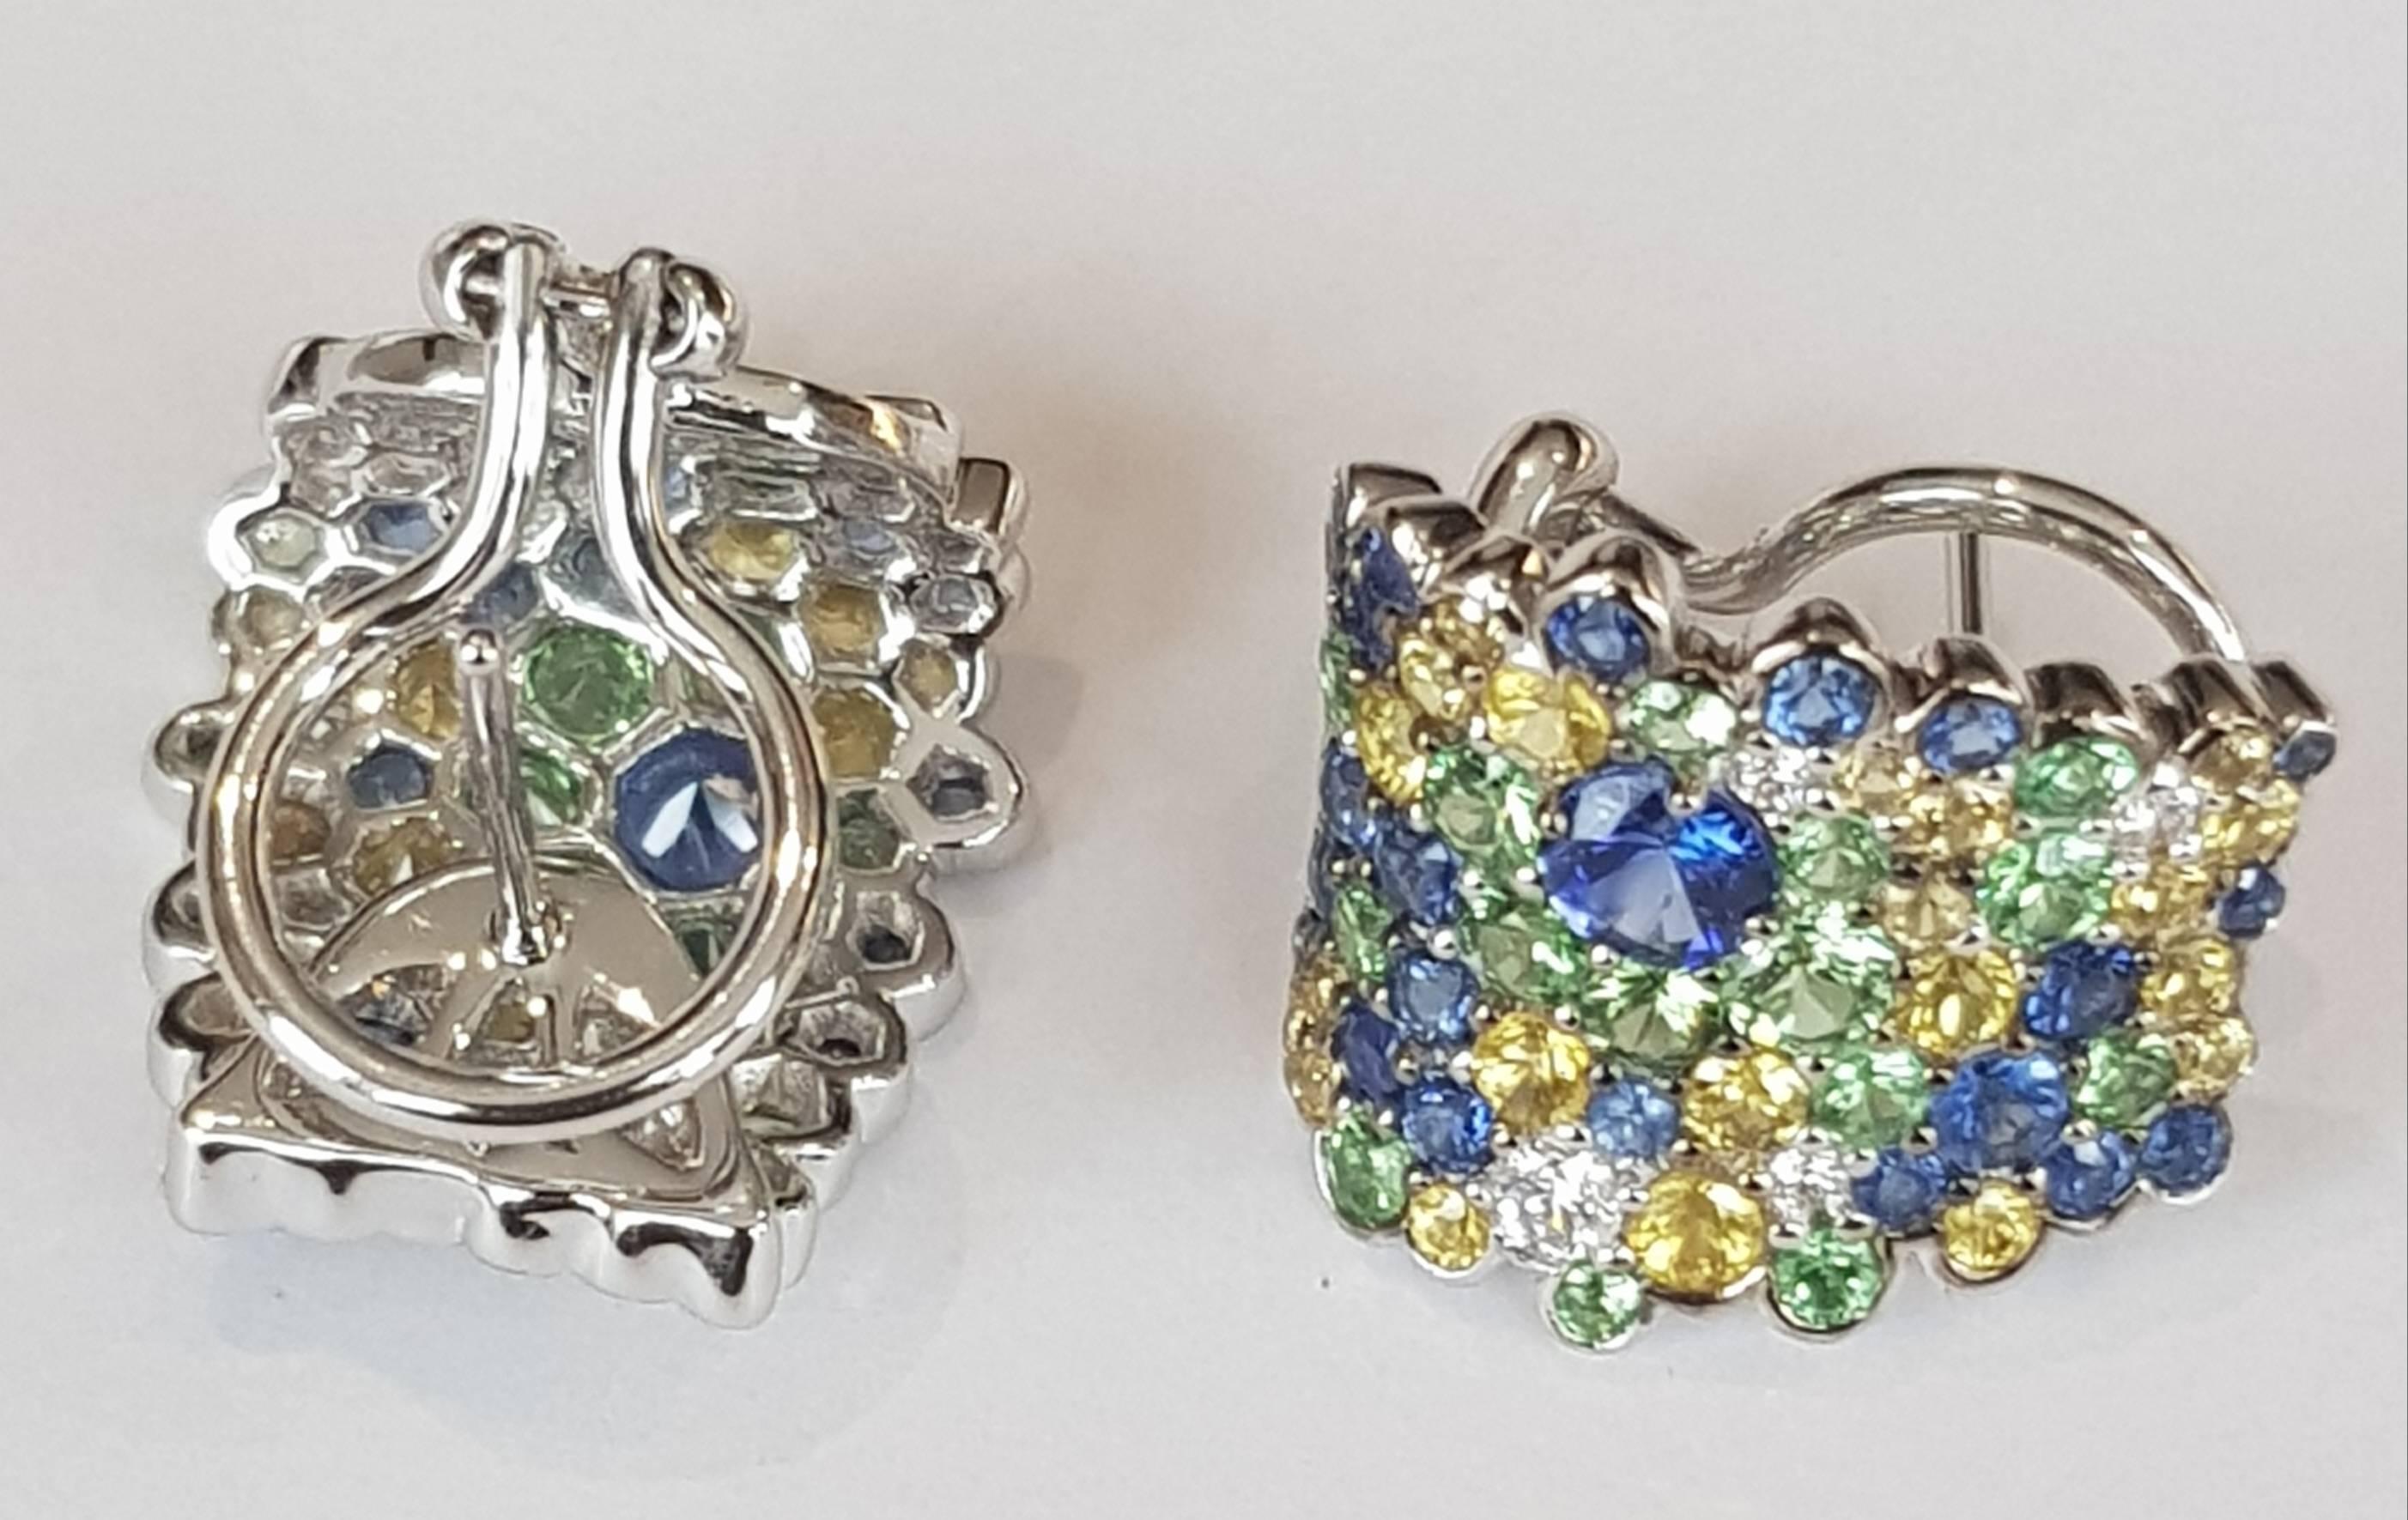 Sapphire, Tsavorite and Diamond Ring
8 diamonds ca 0.26 ct
46 blue sapphires 2.52 ct
42 yellow sapphires 1.75 ct
30 tsavorites 1.67 ct
18 karat white gold
comes with studs and clips / either can be removed 